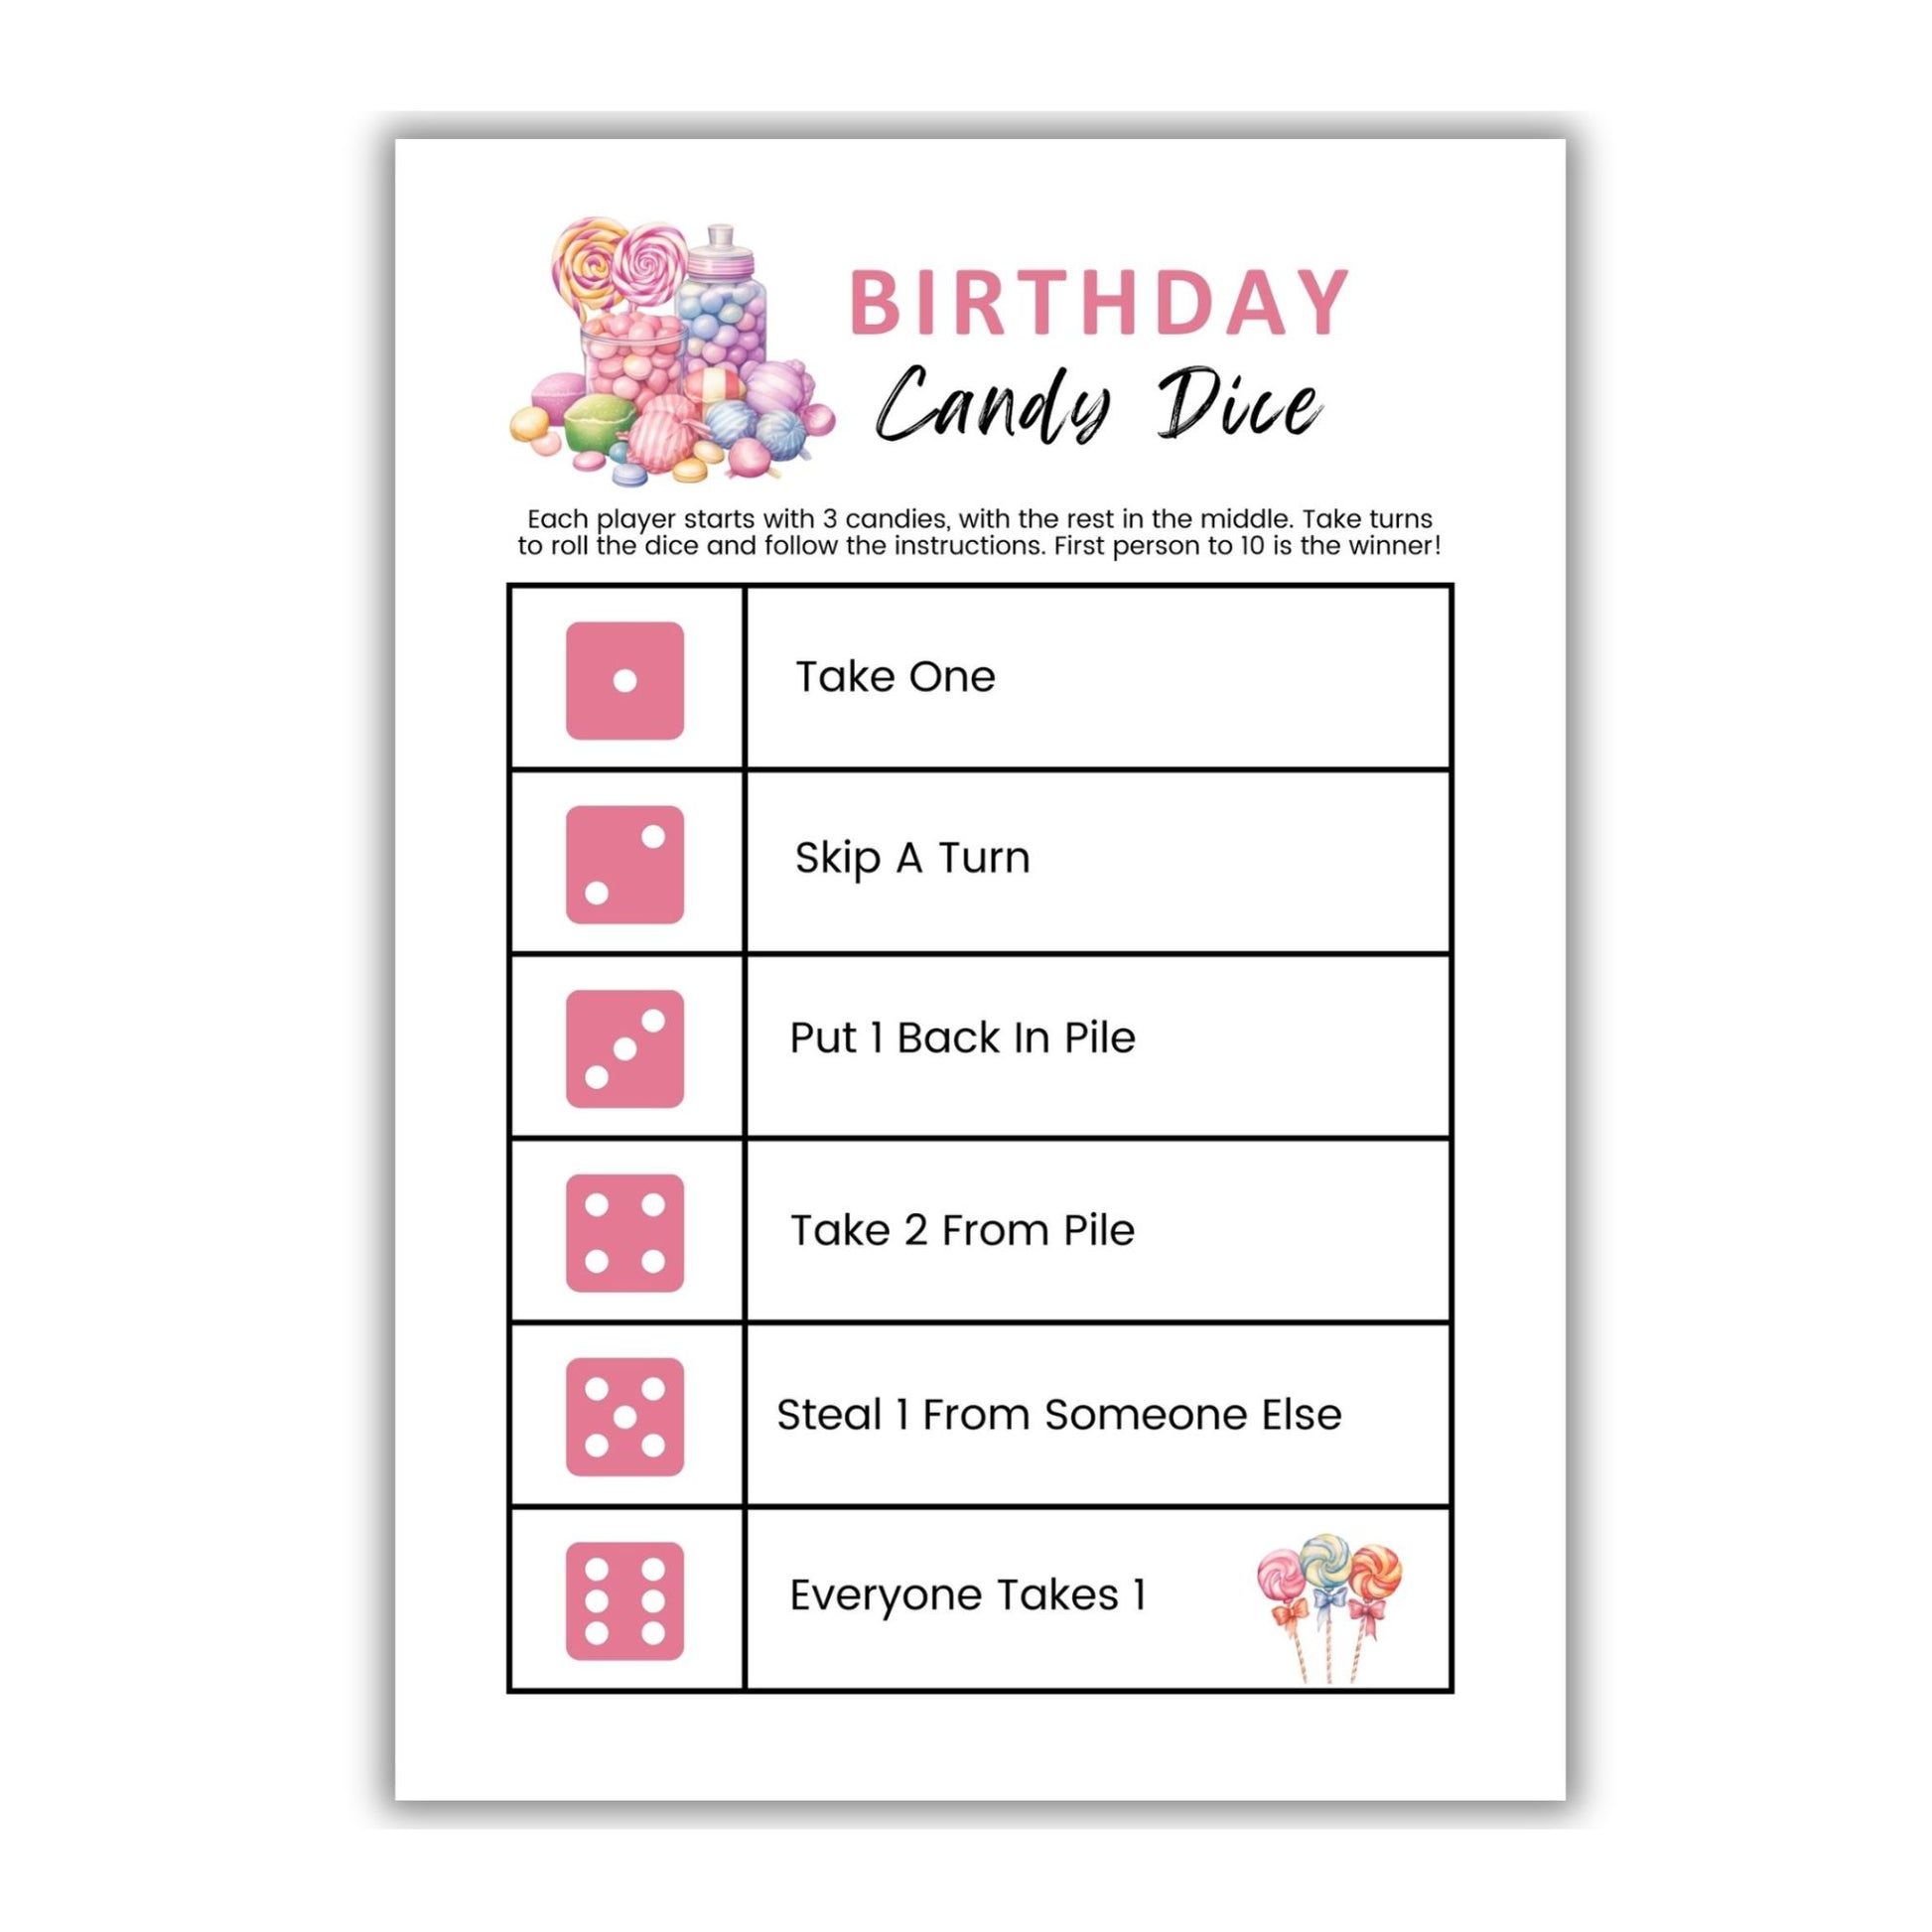 Birthday Candy Dice Game - Simplify Create Inspire